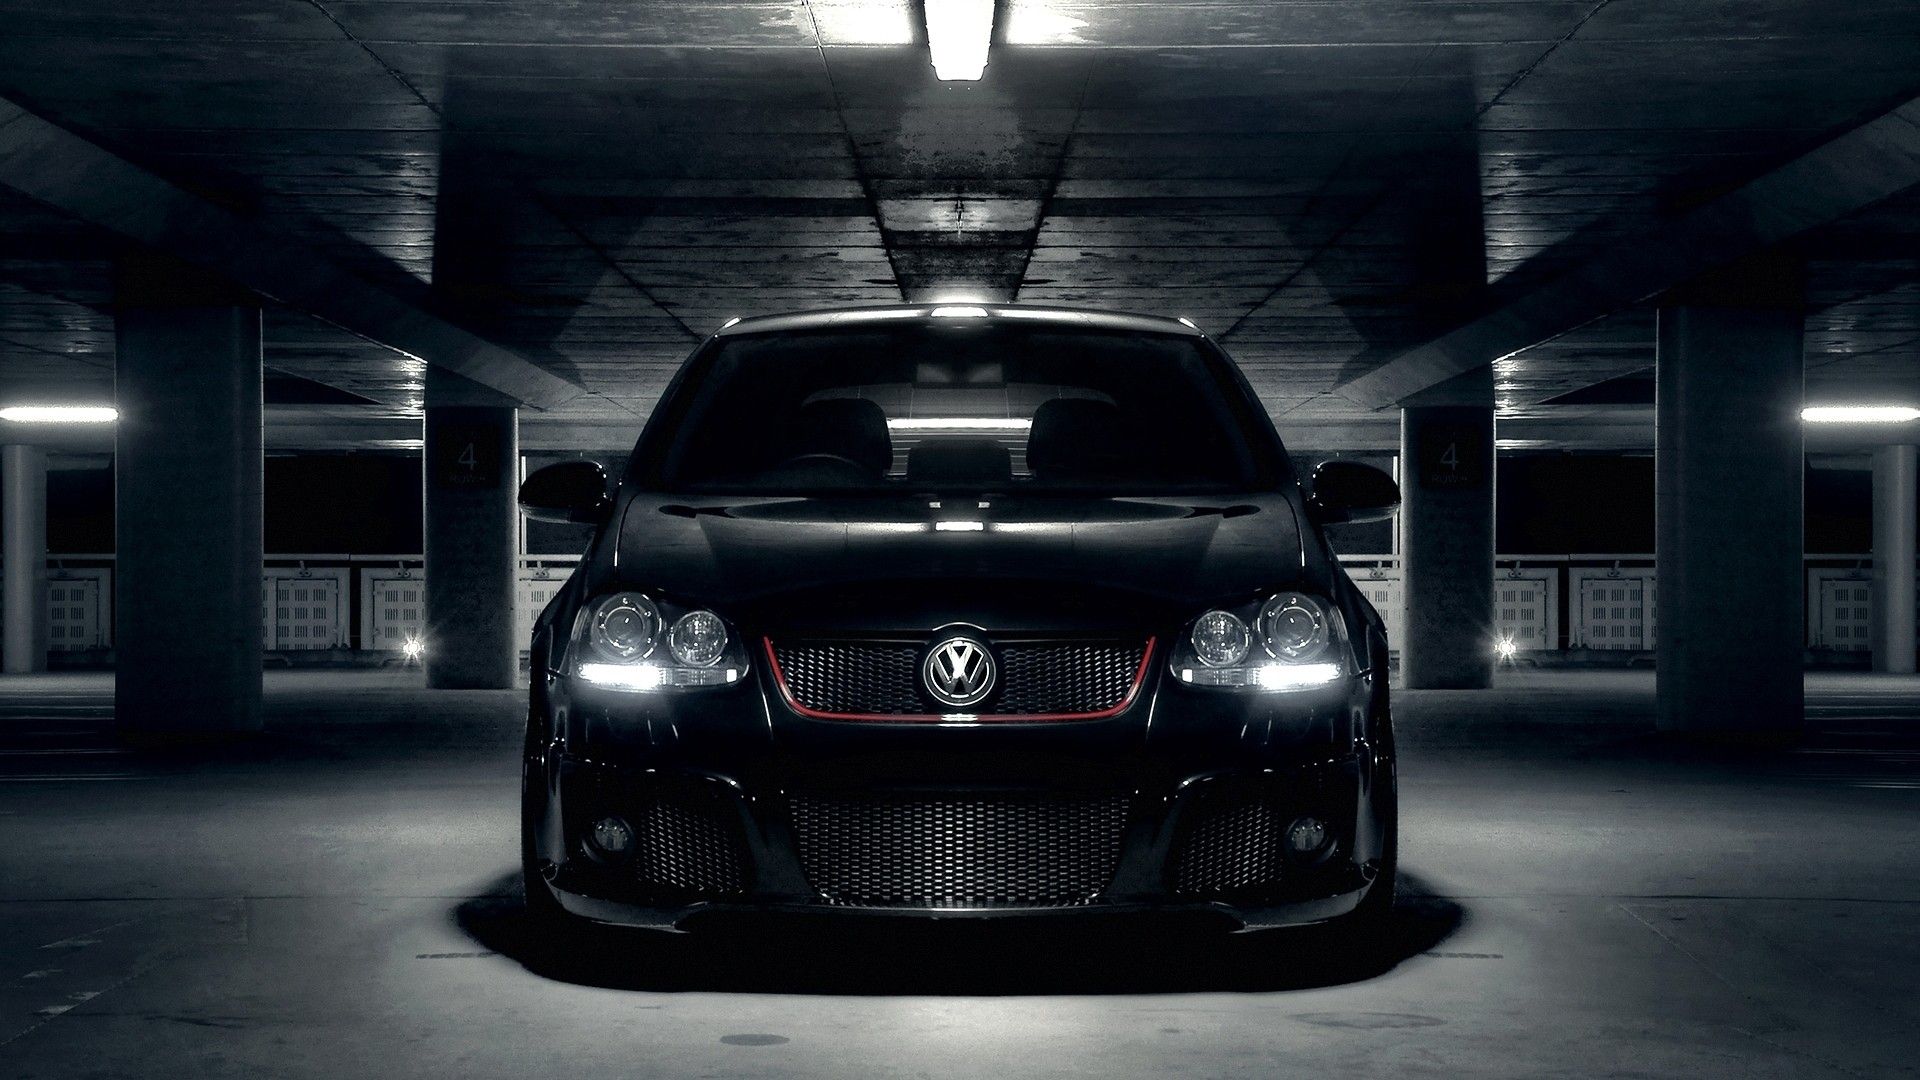 VW Golf GTI picture for desktop and wallpaper. Car volkswagen, Gti car, Volkswagen golf gti